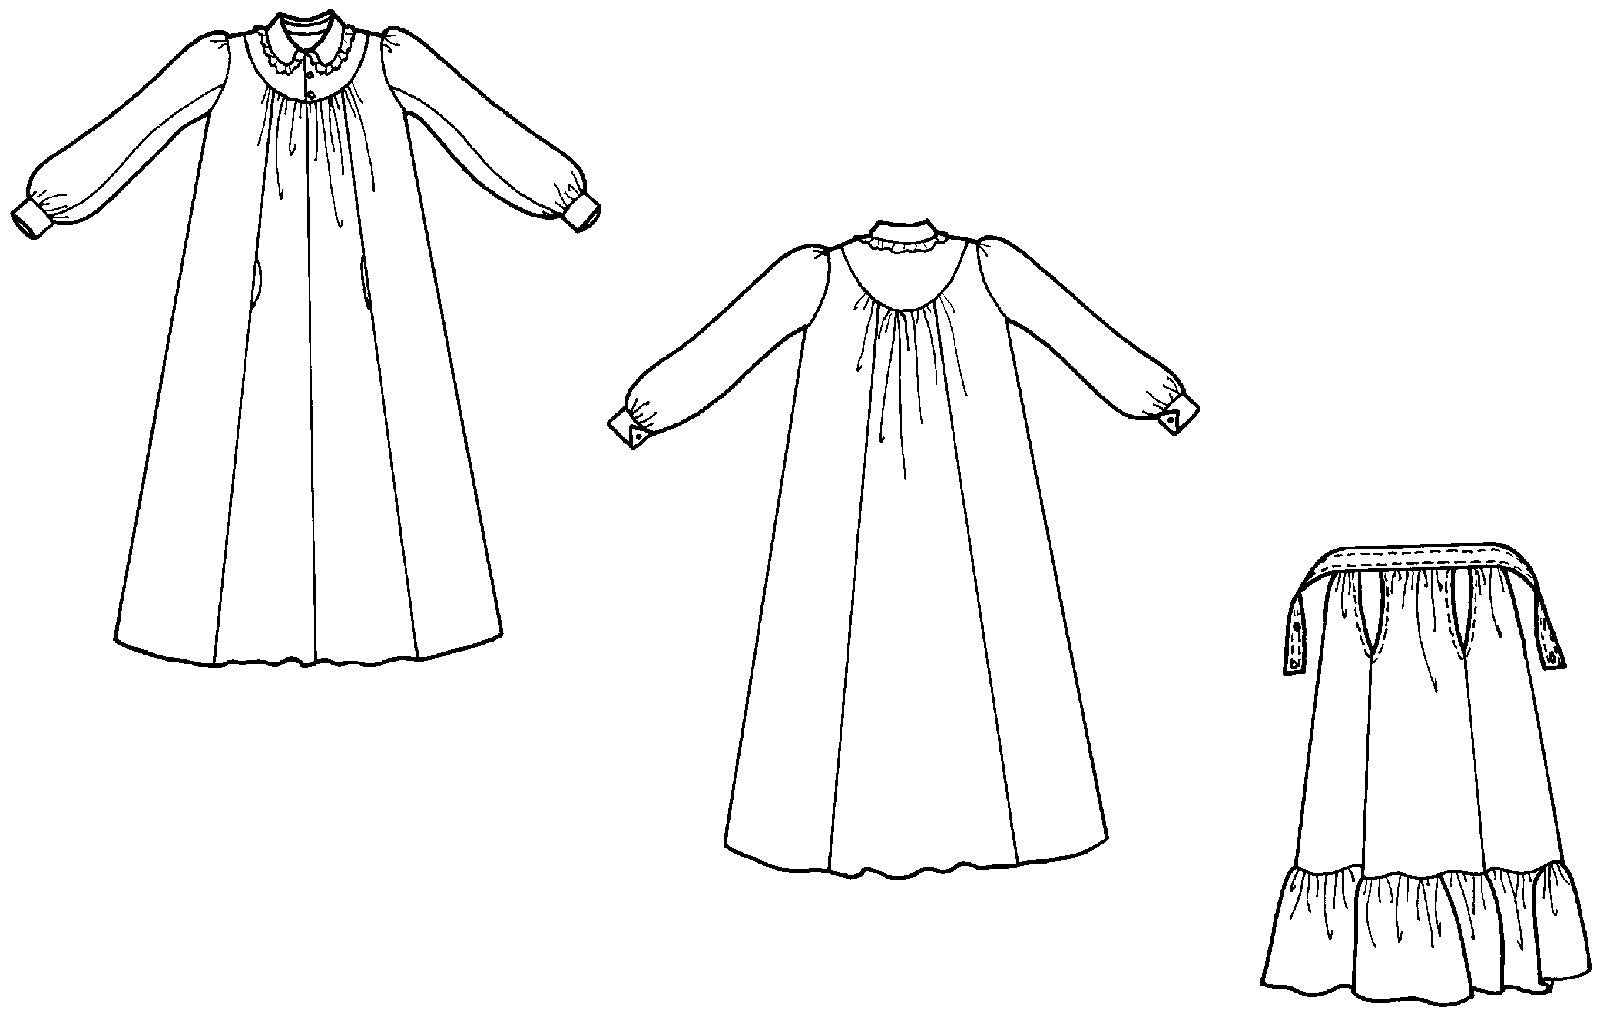 Flat line drawings of front and back view of Prairie Dress and apron